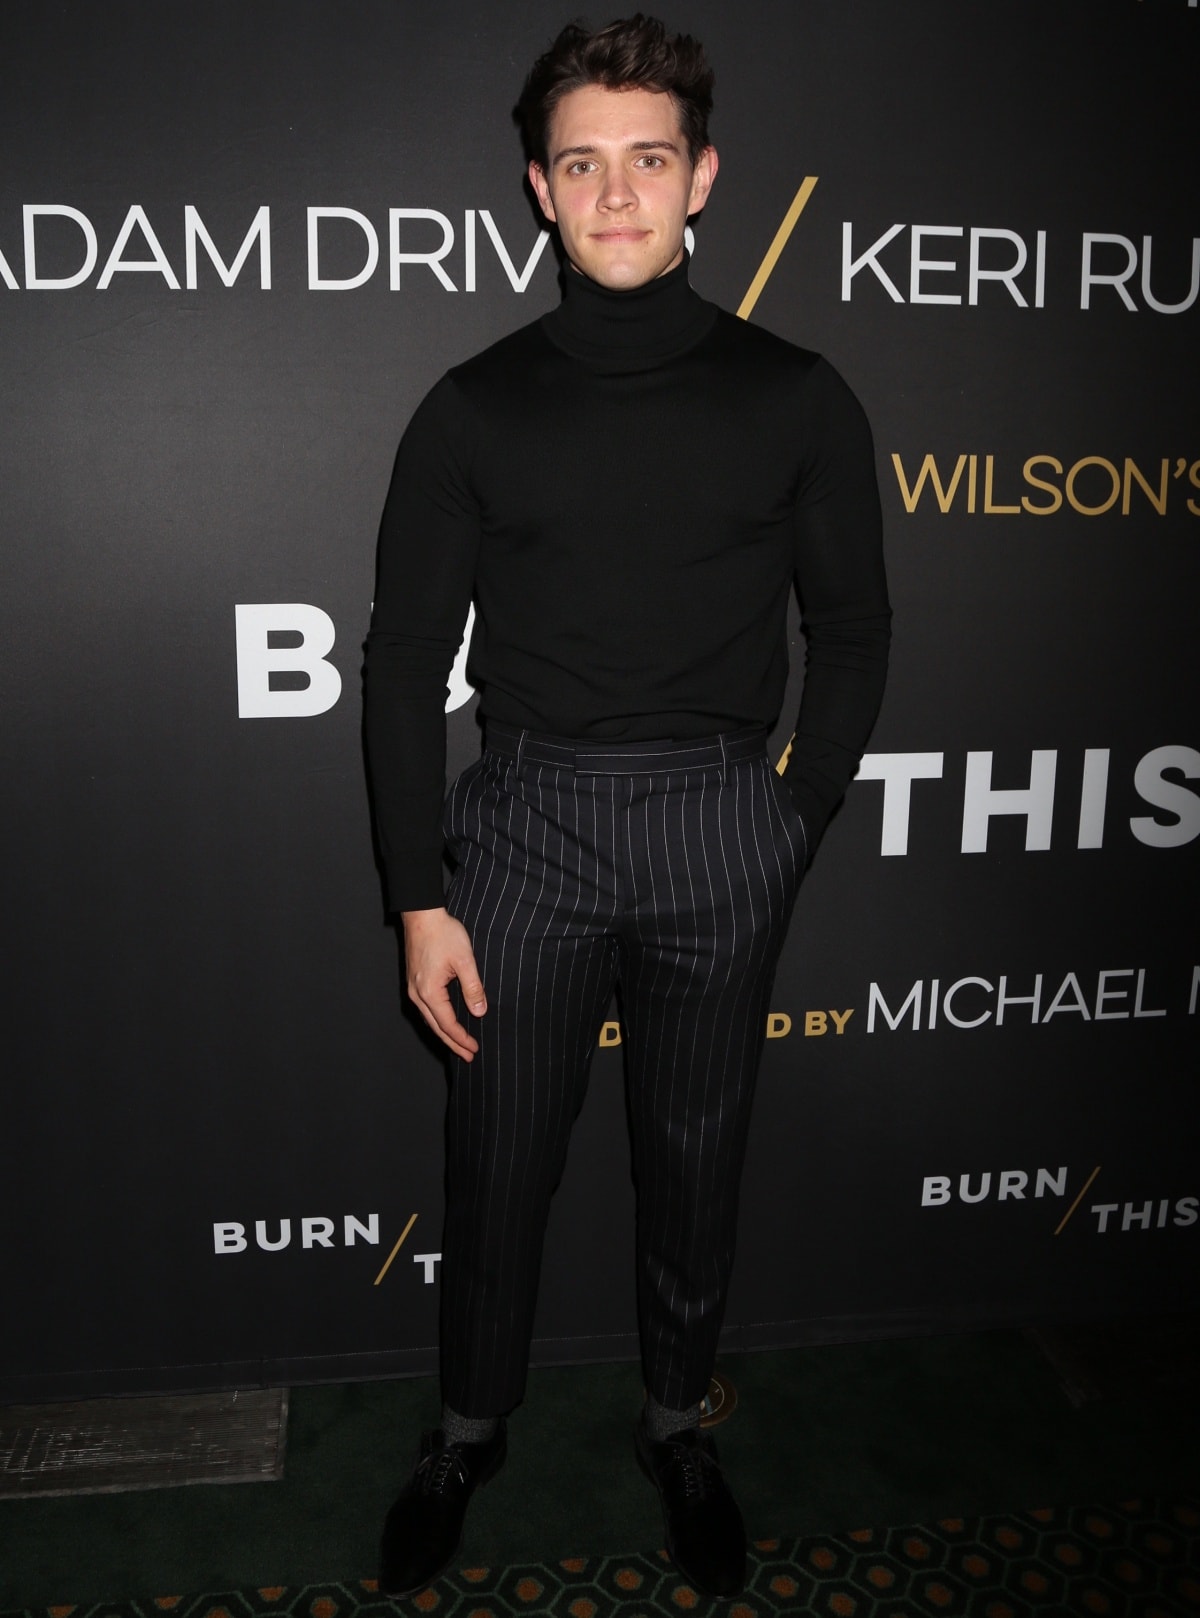 Casey Cott has a height of 5 feet and 11 ½ inches, and he has a $3 million net worth